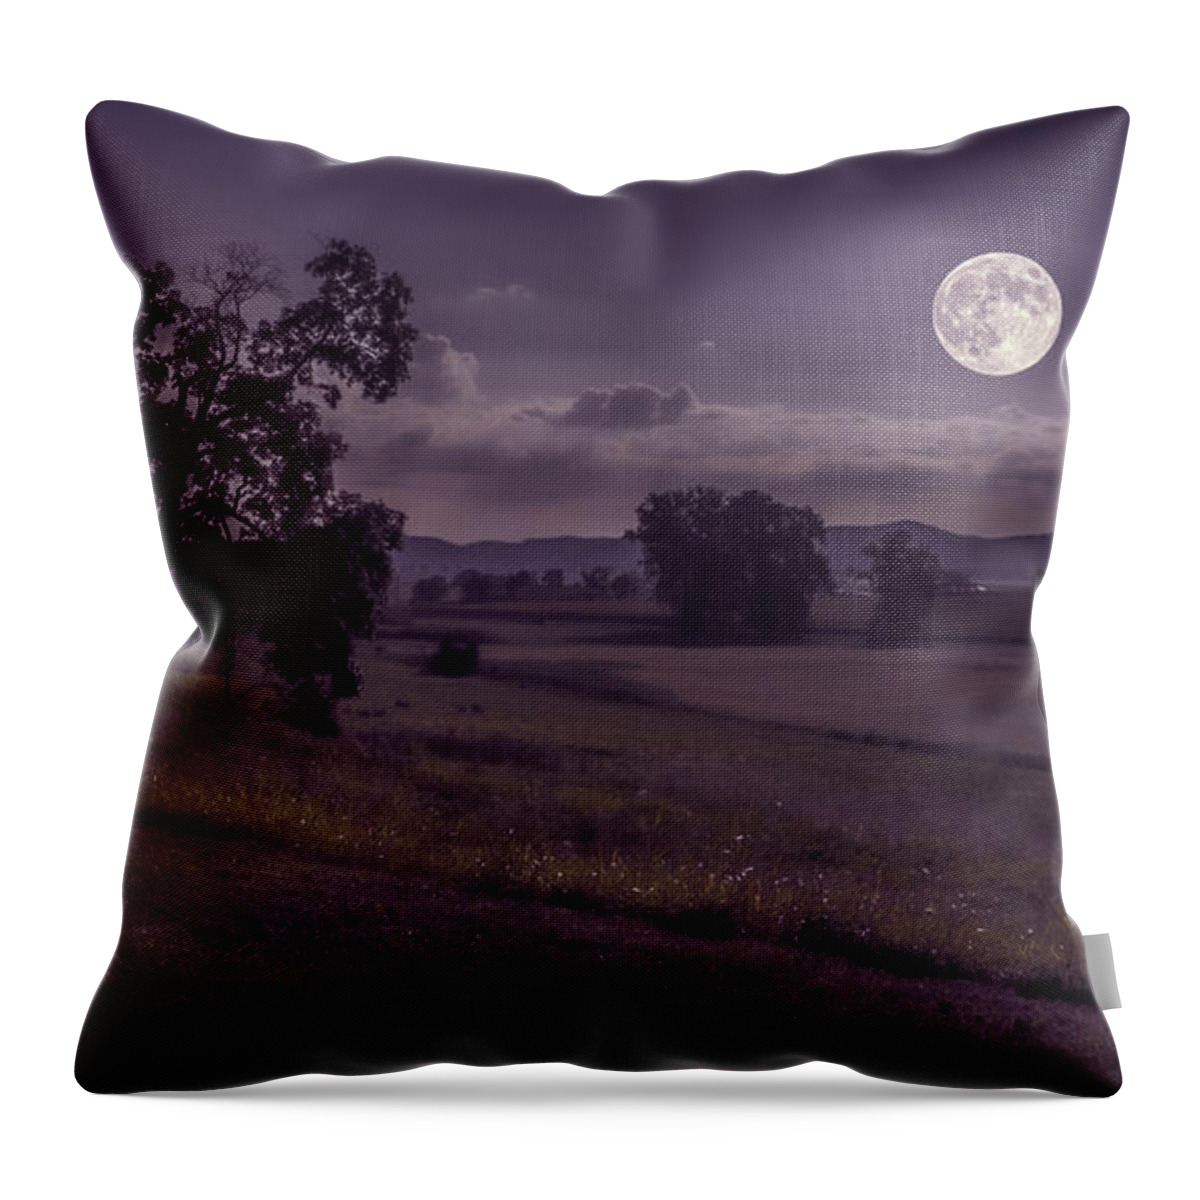 Harvestmoon Throw Pillow featuring the photograph Shine On Harvest Moon by Jaki Miller